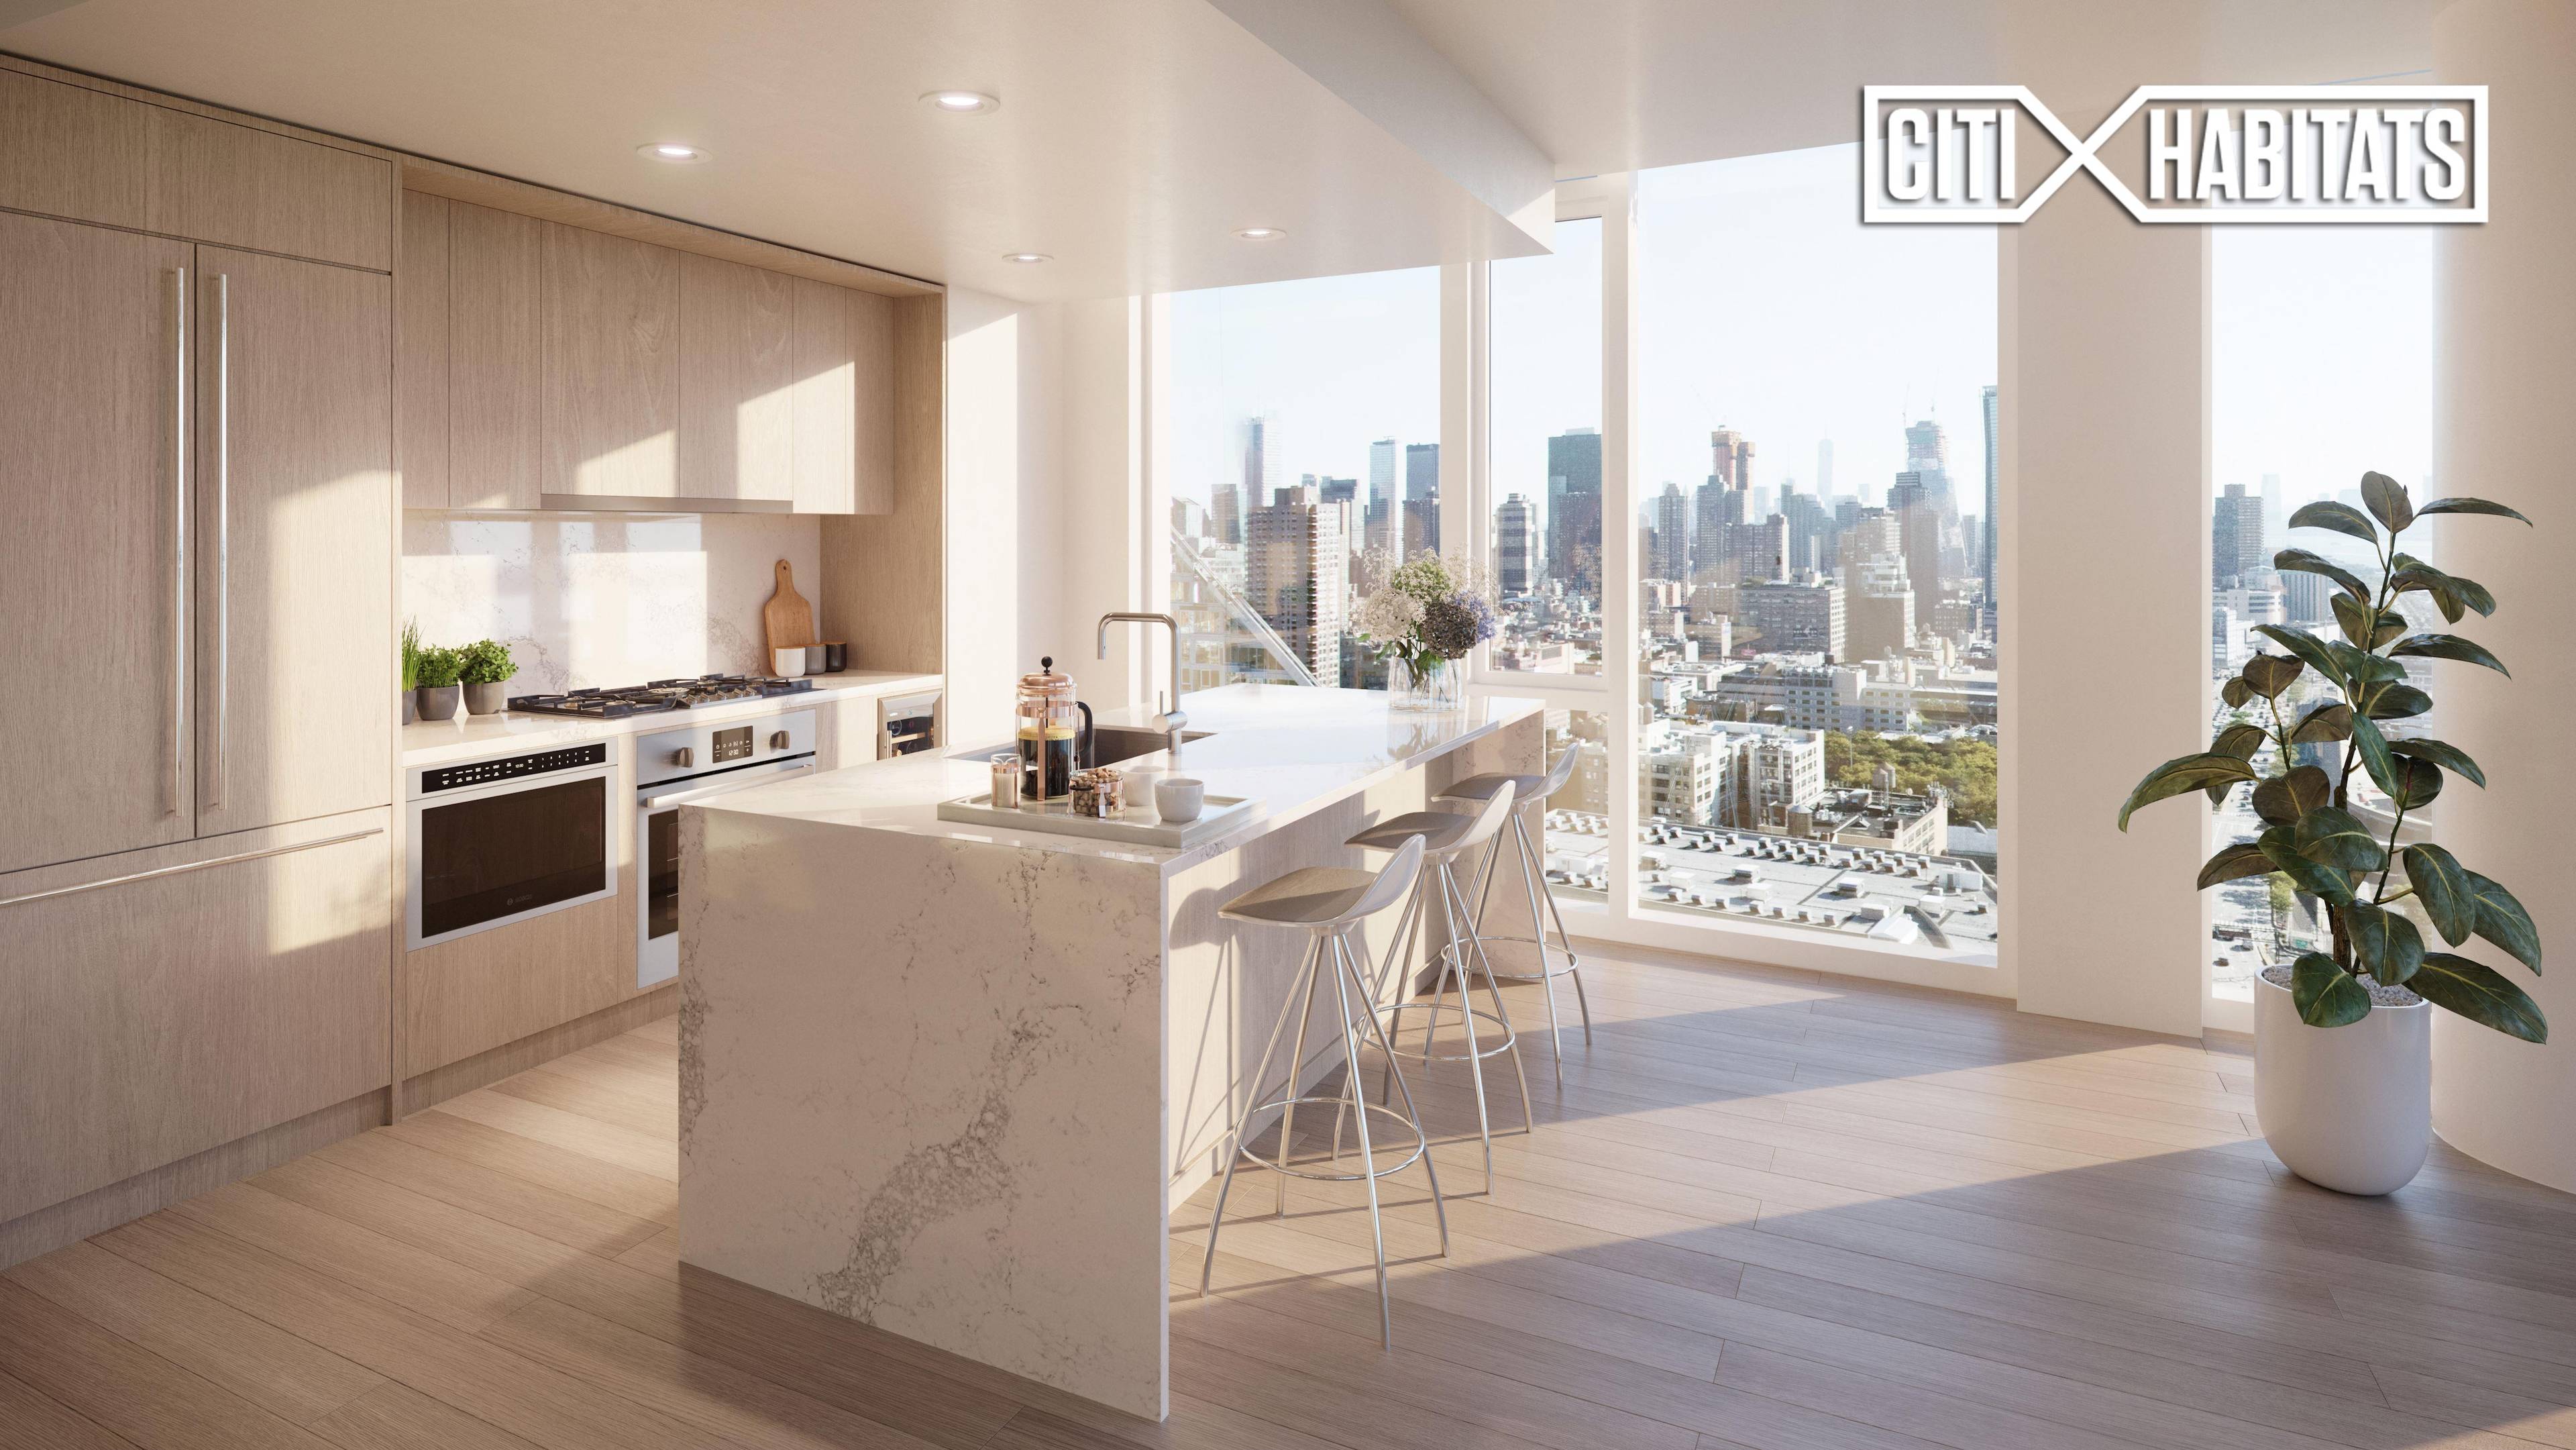 Waterline Square Luxury Rentals offer an unparalleled high quality, timeless design with spacious, light filled layouts and breathtaking views.